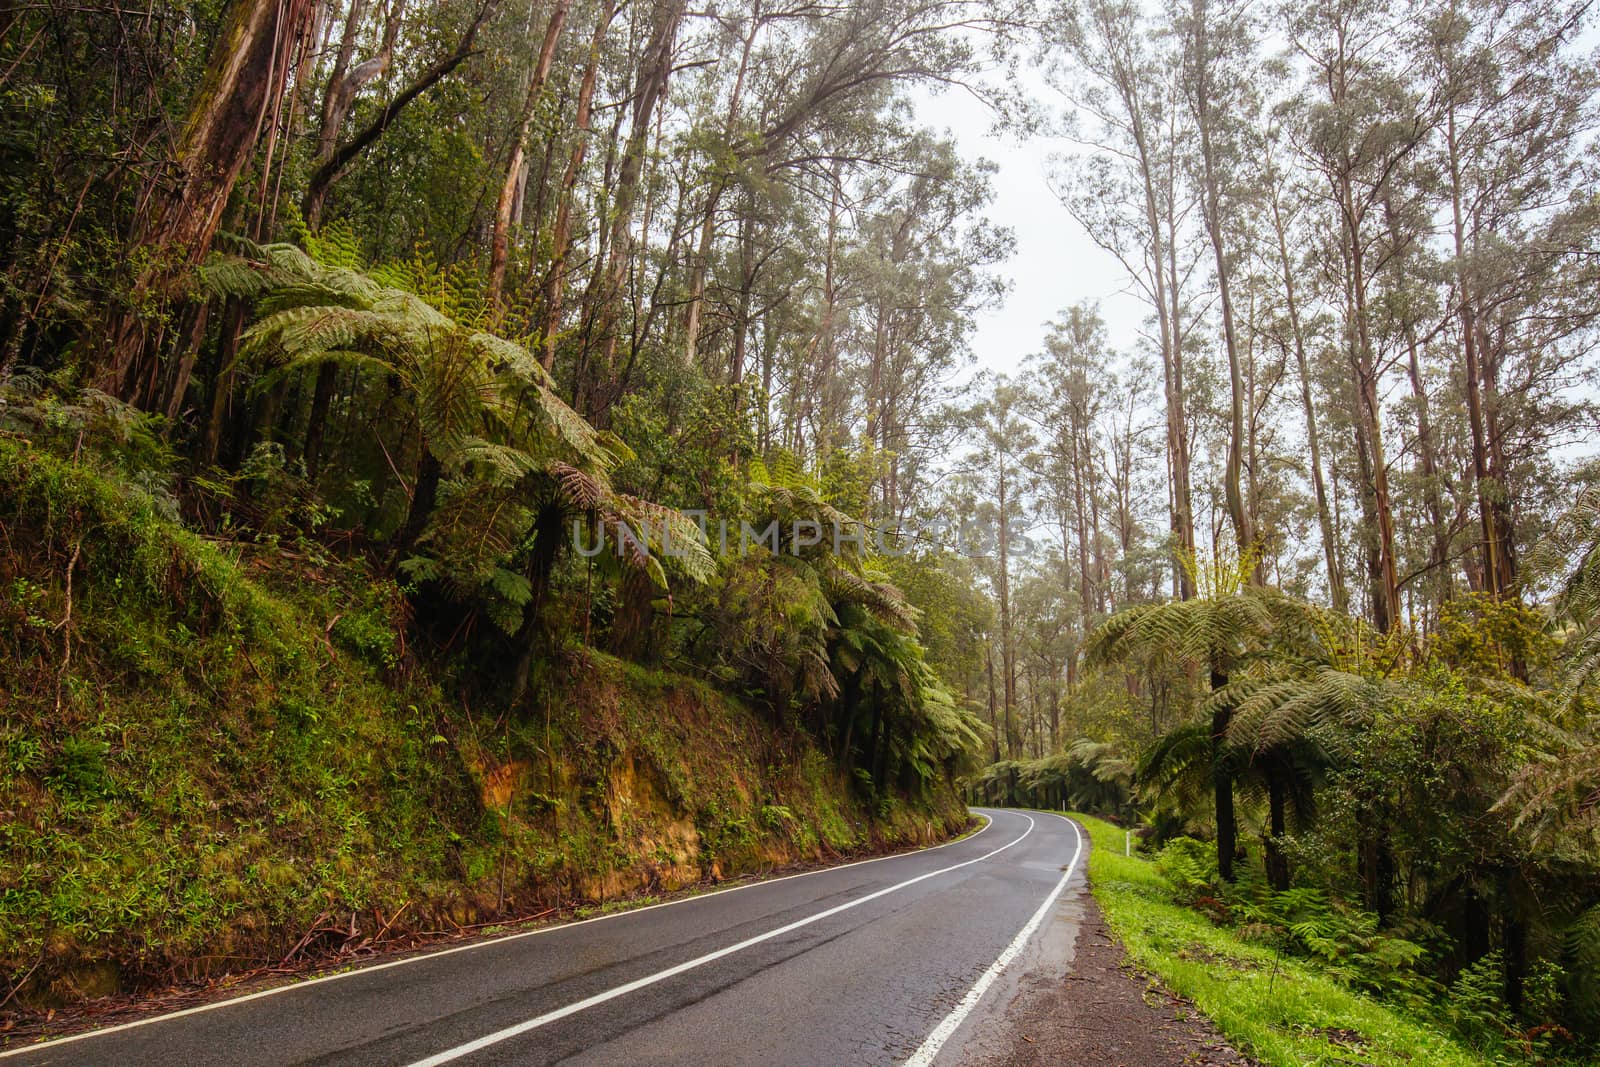 The Yarra Junction to Noojee Rd winds thru ancient forest near Powelltown in Victoria, Australia